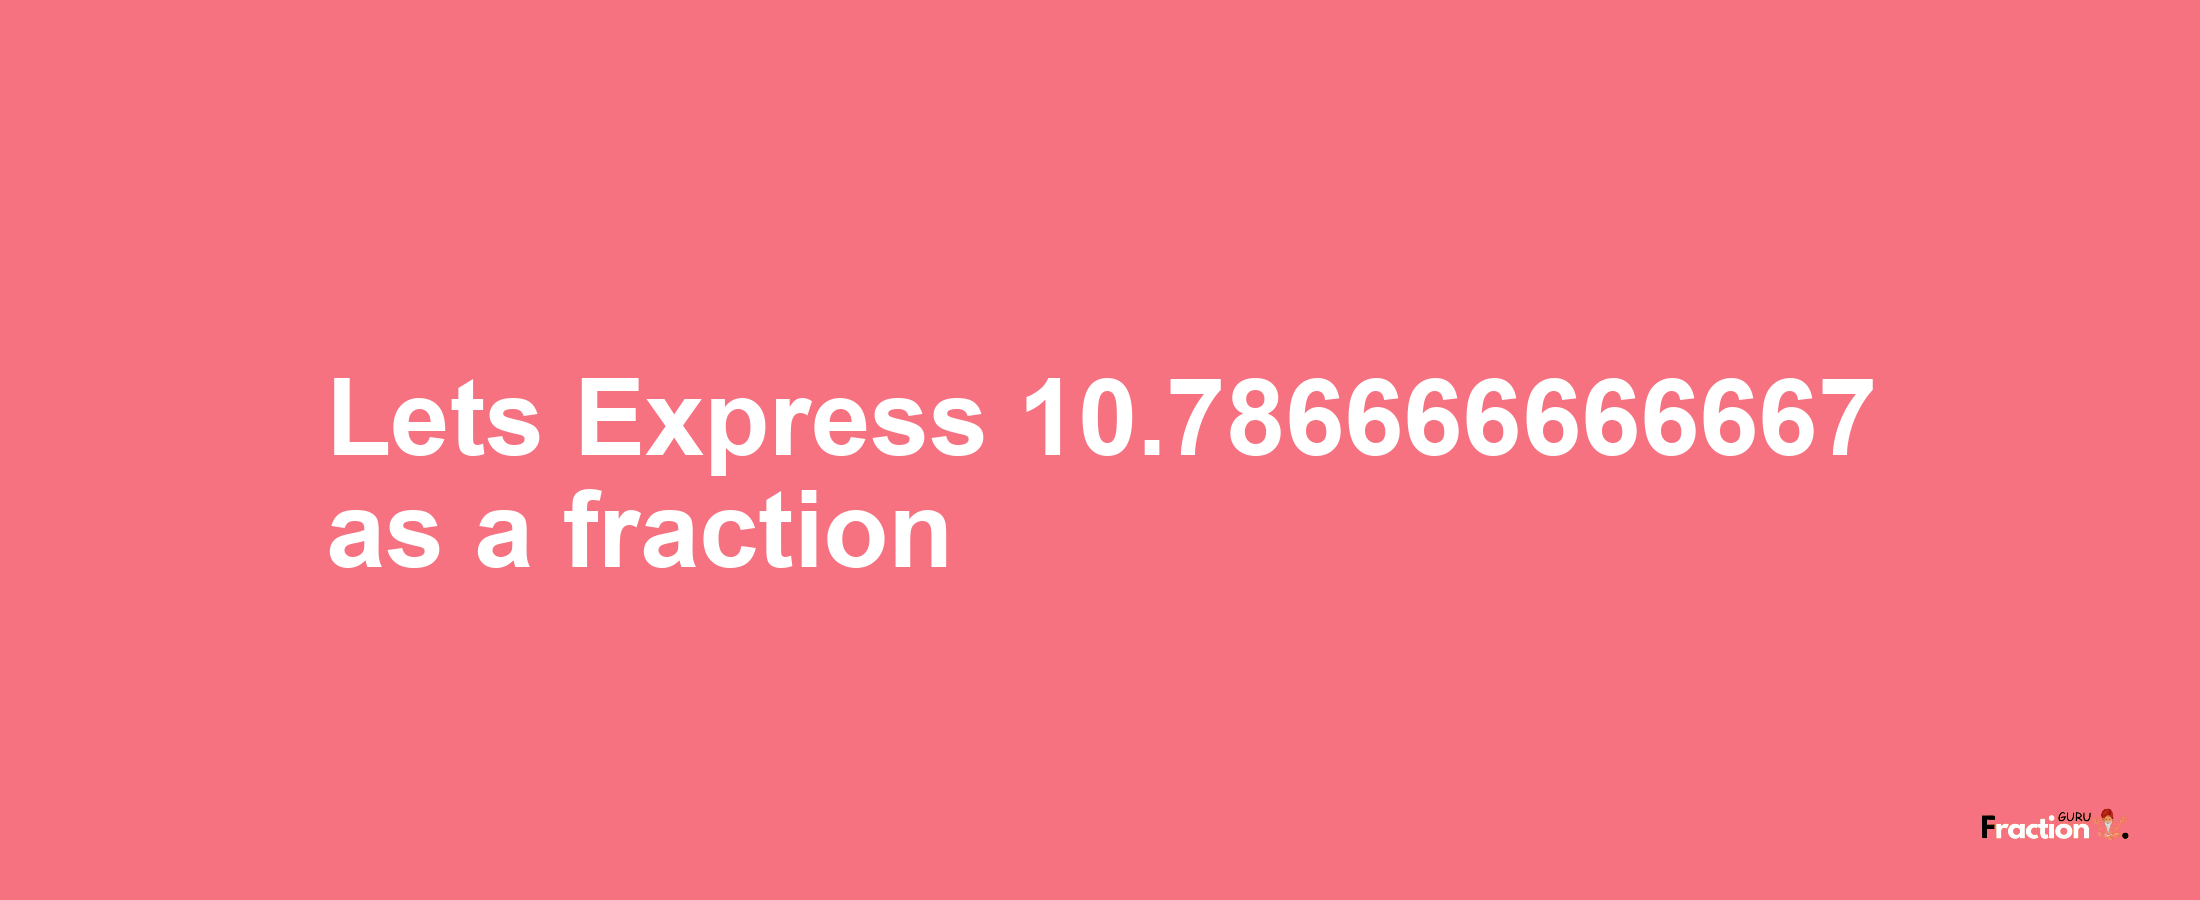 Lets Express 10.786666666667 as afraction